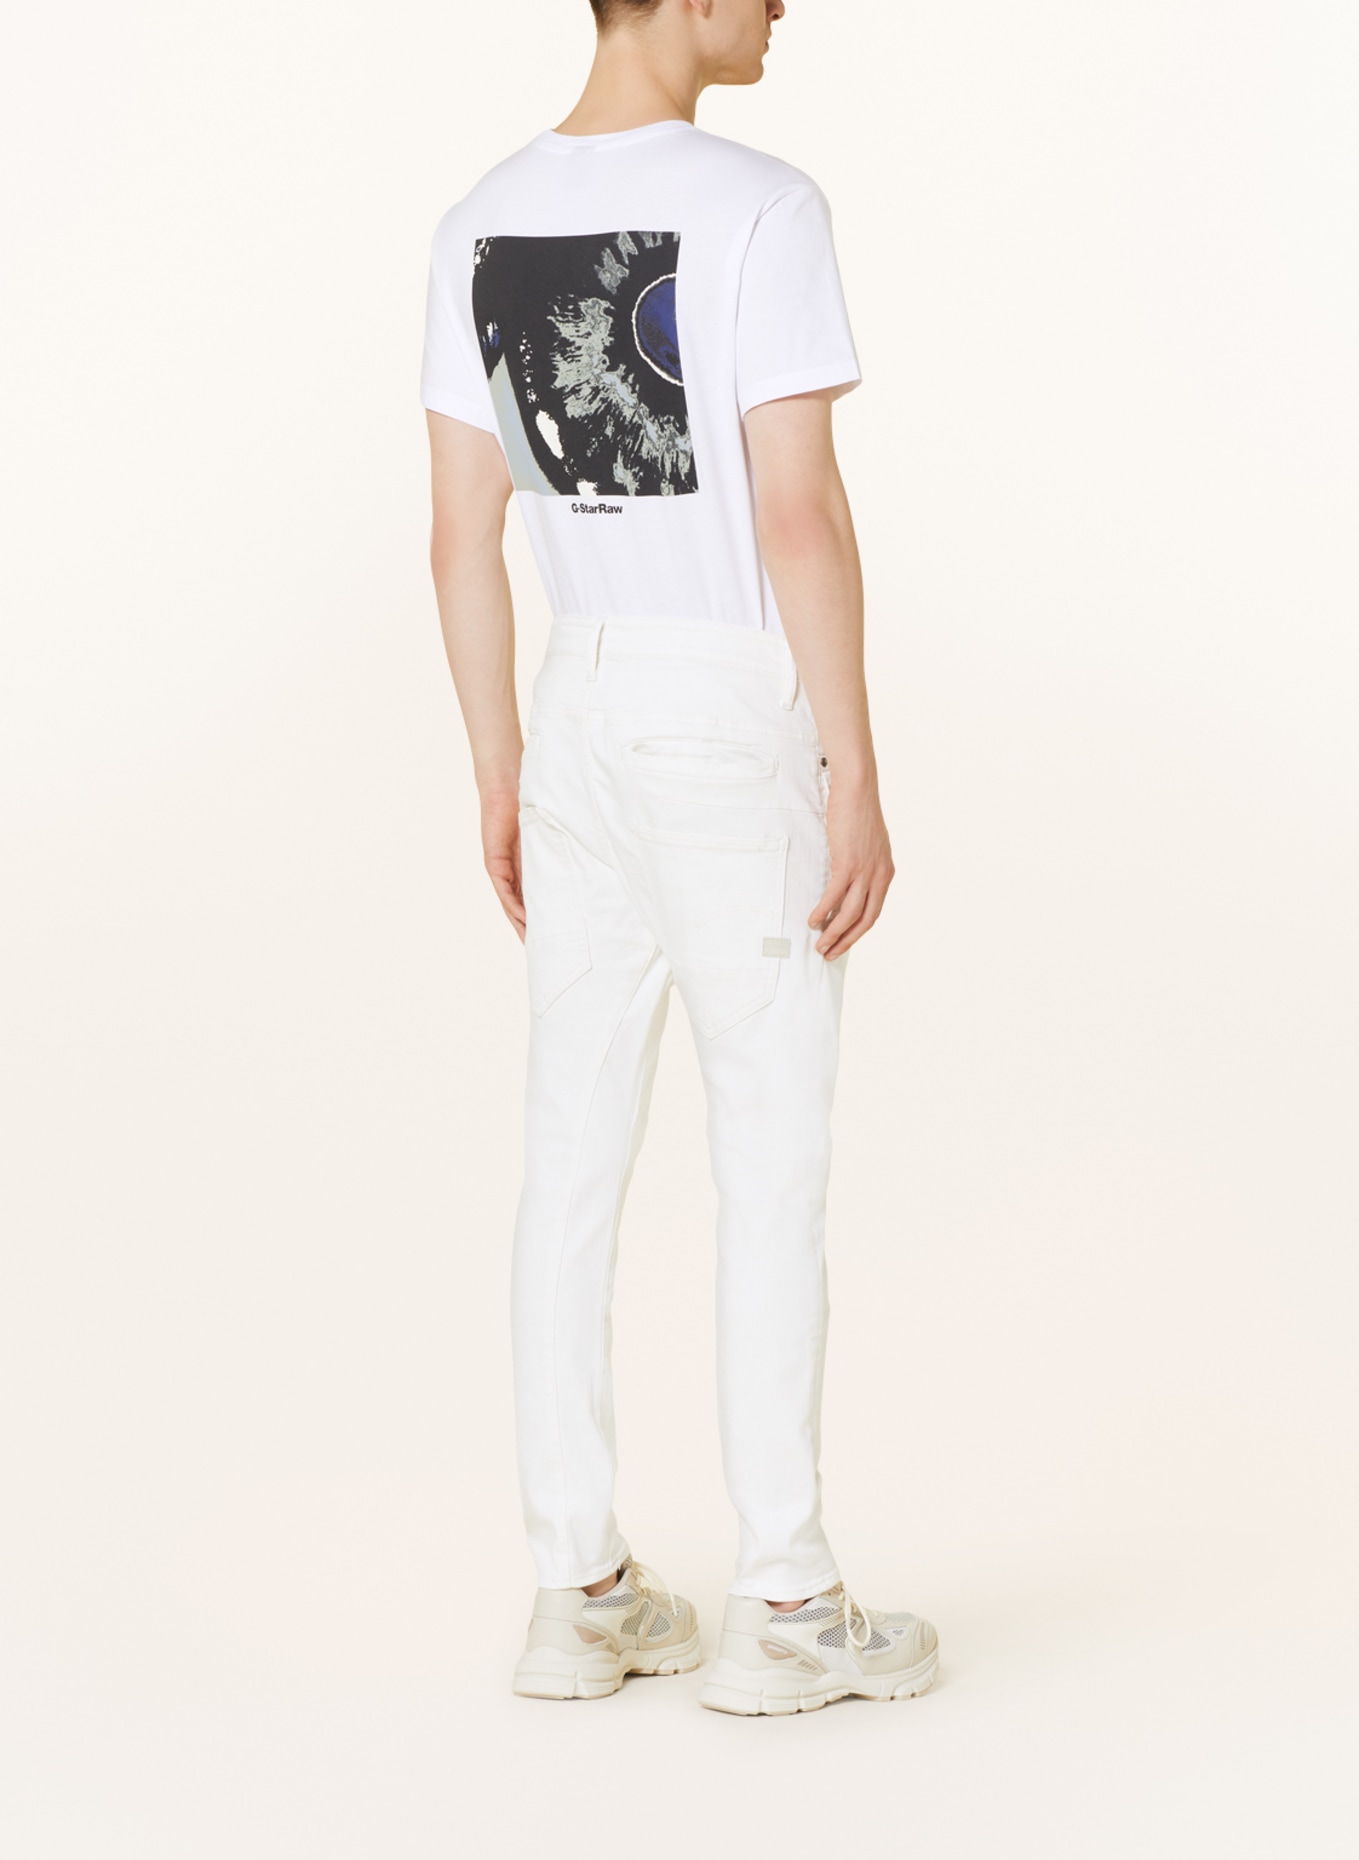 G-Star RAW Jeans D-STAQ 3D slim fit, Color: G006 white gd (Image 3)